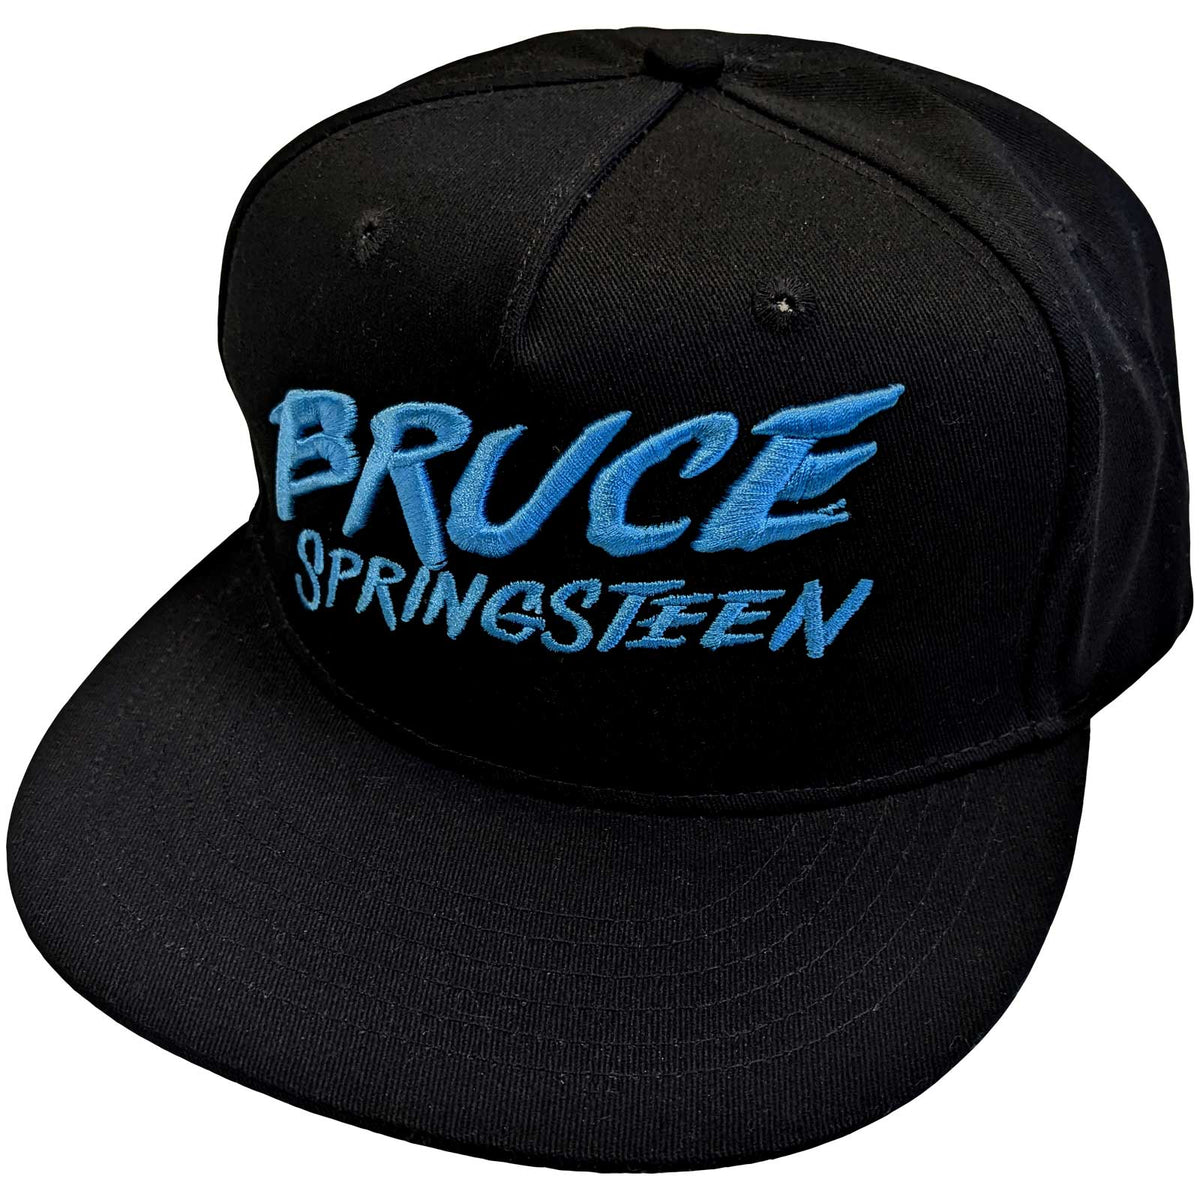 Bruce Springsteen Unisex Snapback Cap - The River Logo - Official Licensed Product